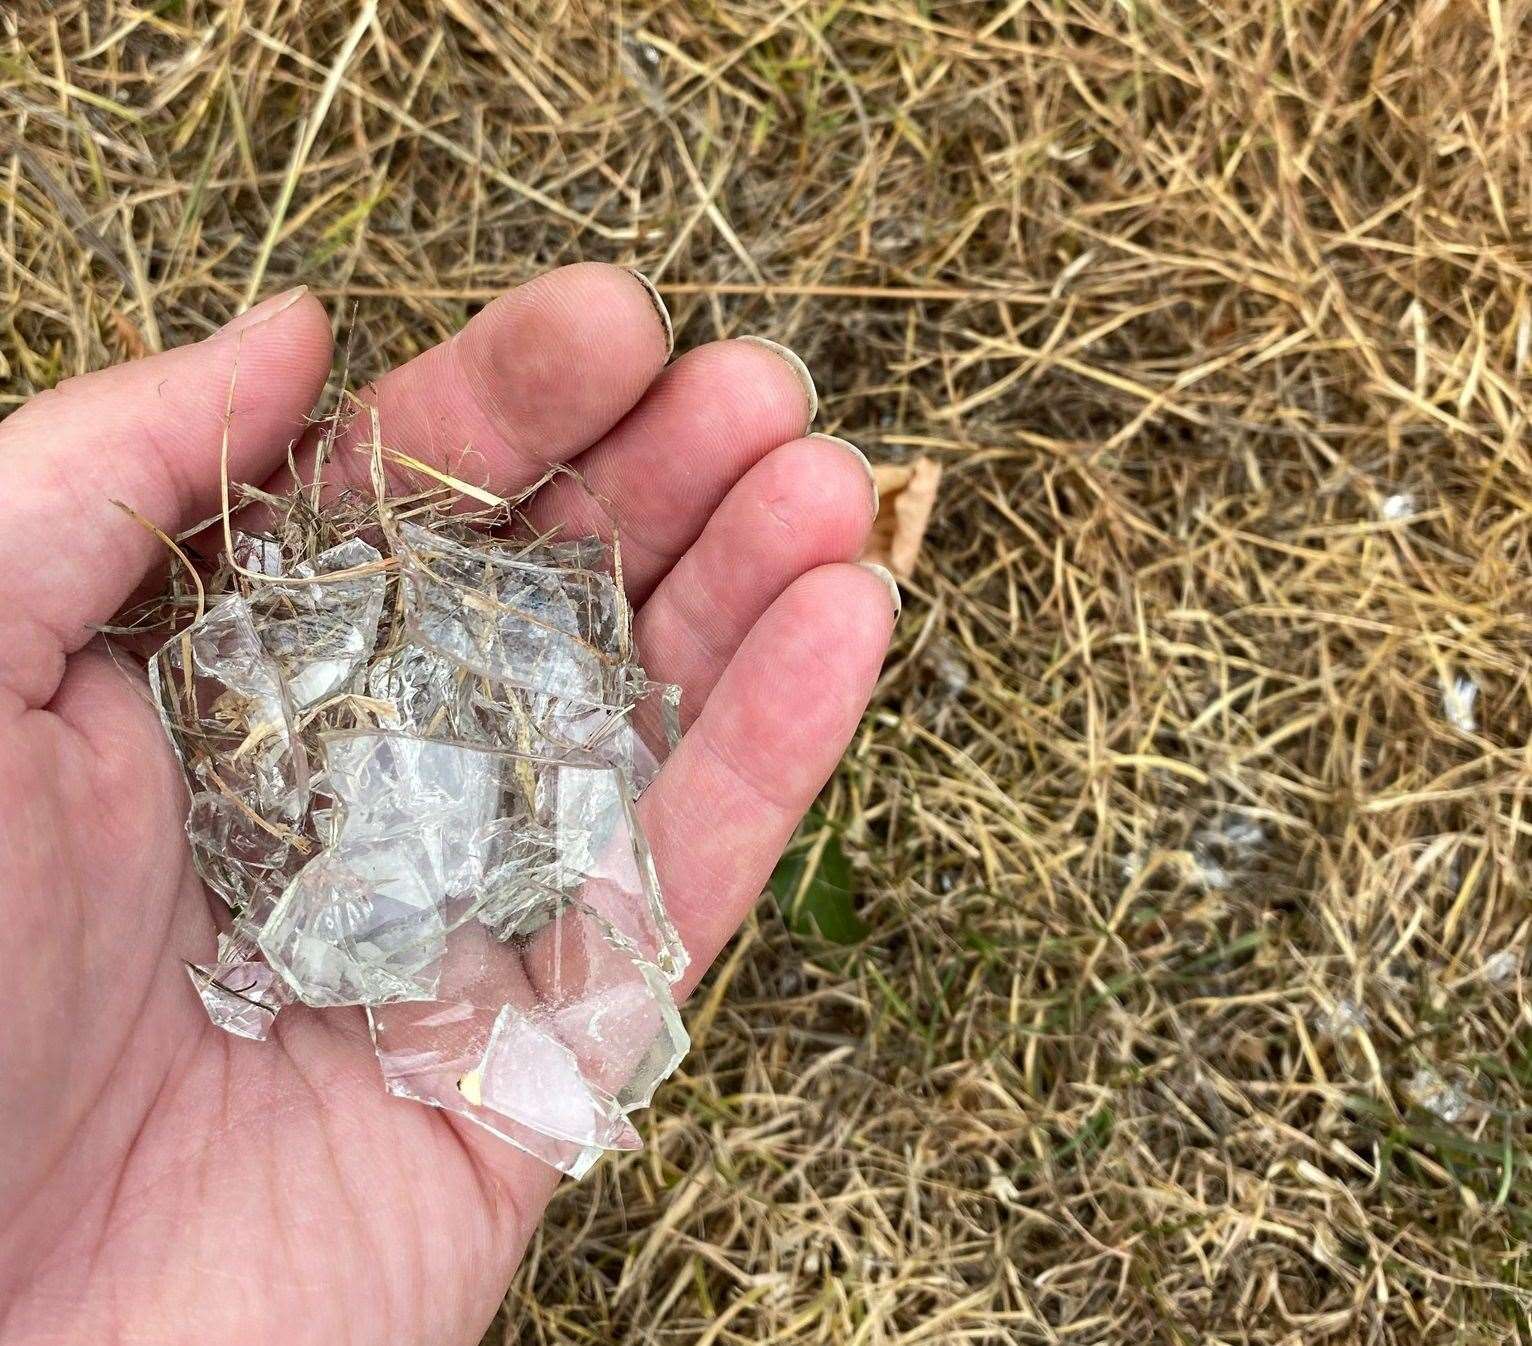 Broken glass found in the grass of the recreation ground Picture: Stuart Bourne